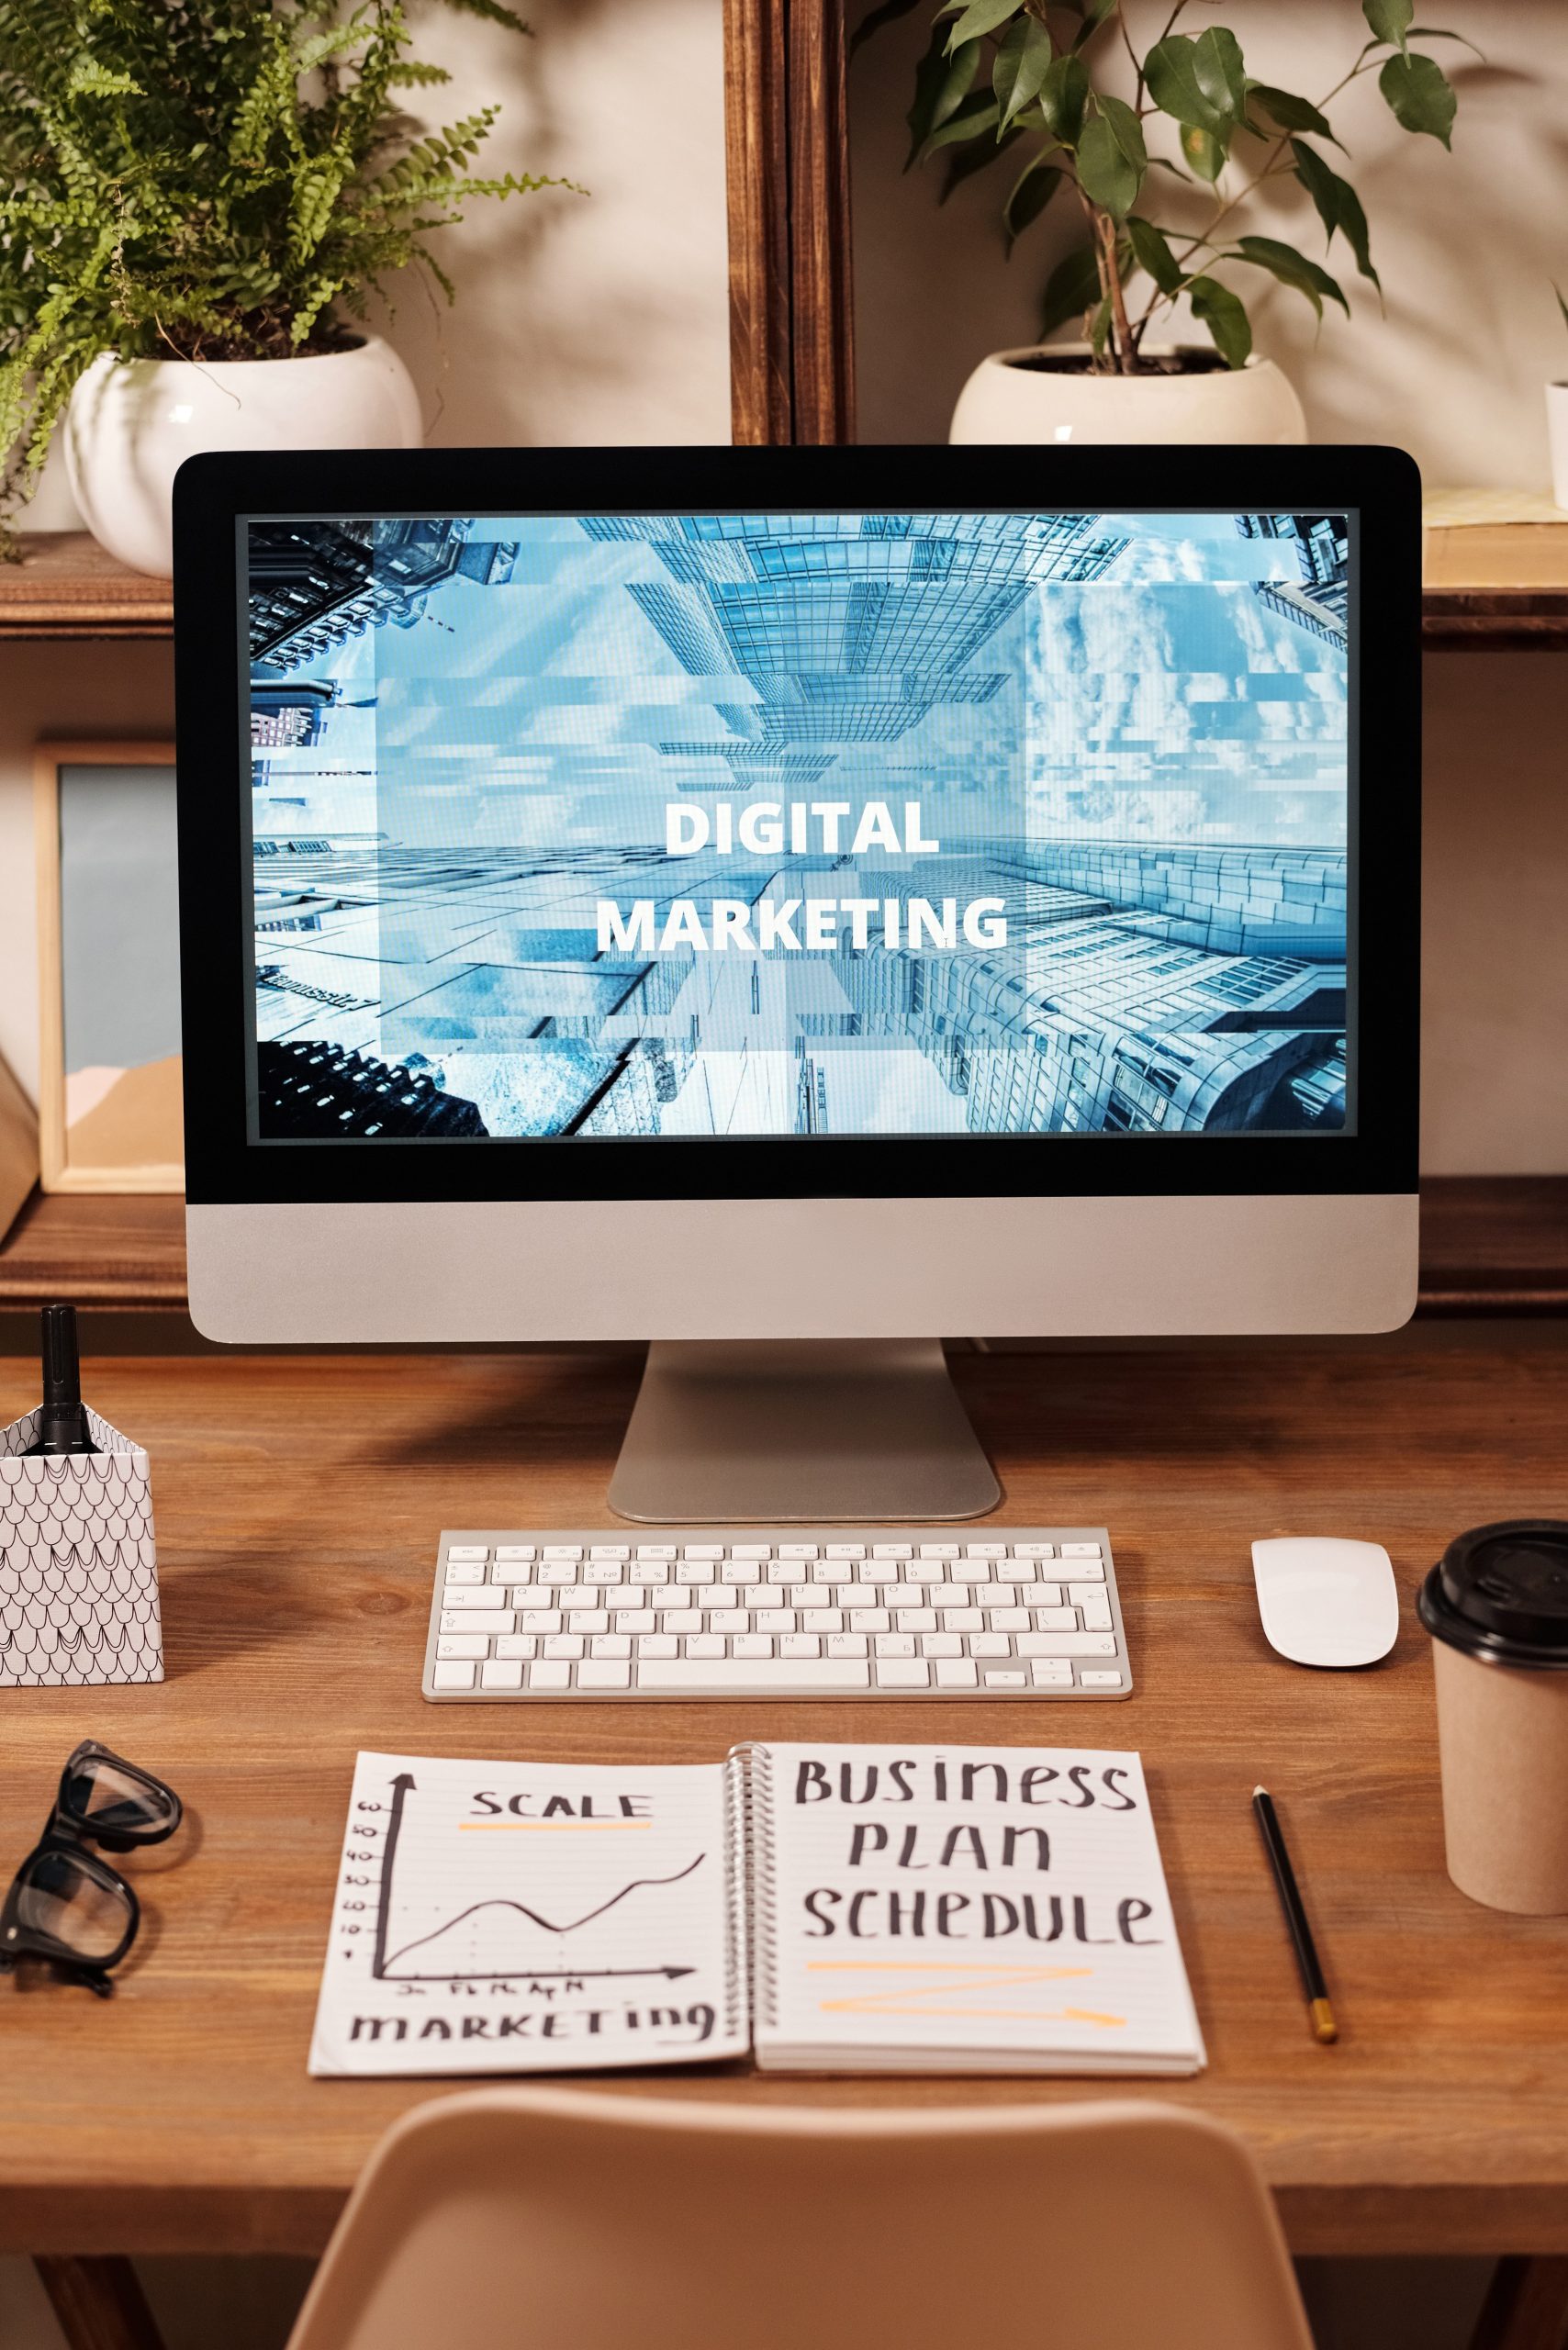 WHAT IS DIGITAL MARKETING? THE FUNDEMENTALS